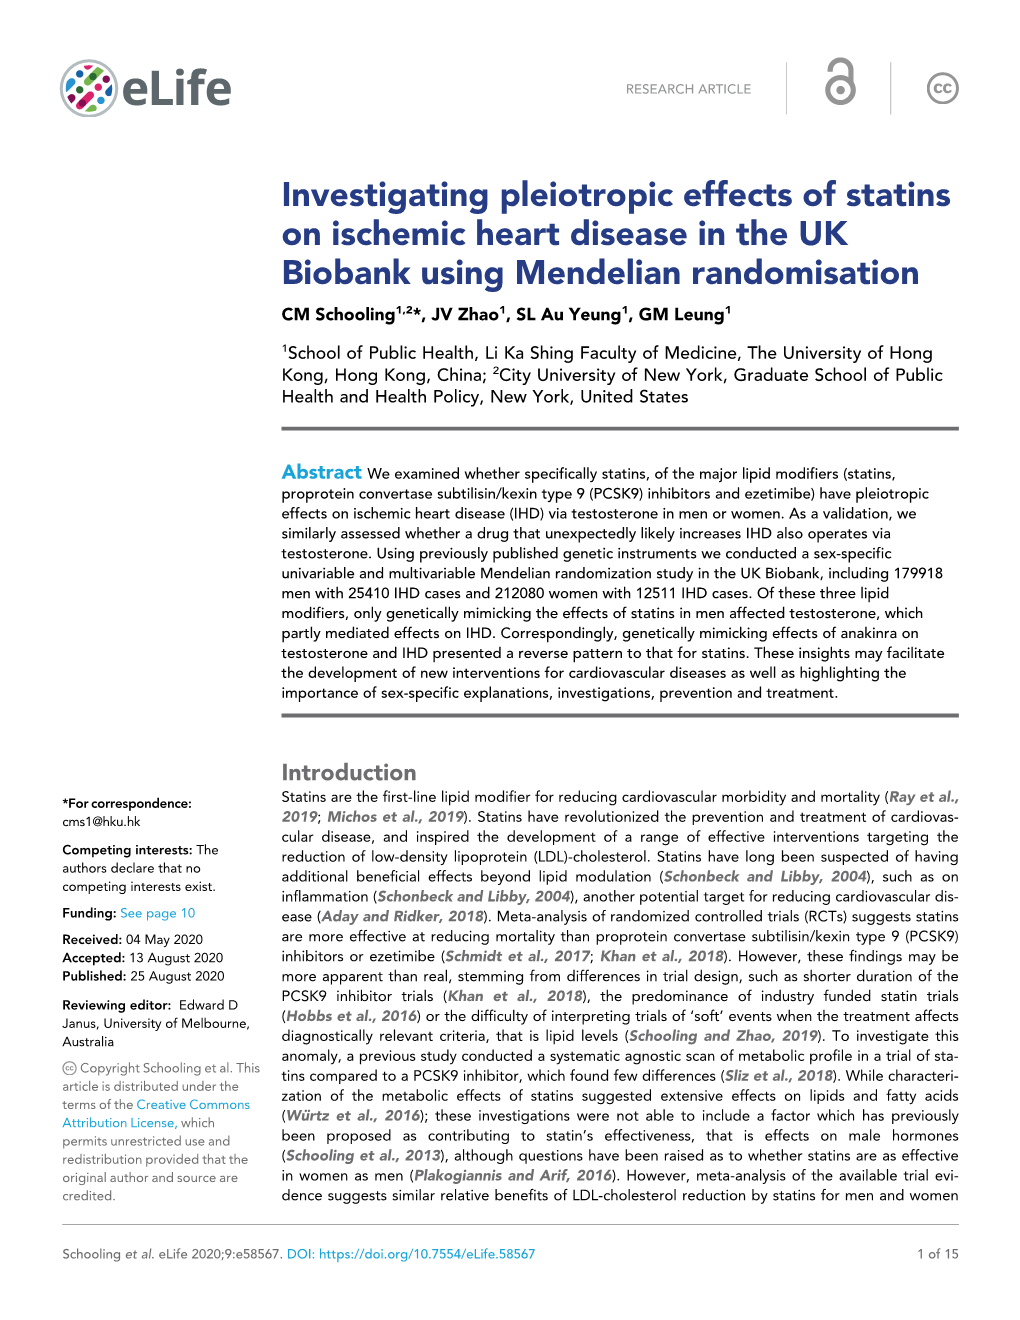 Investigating Pleiotropic Effects of Statins on Ischemic Heart Disease In